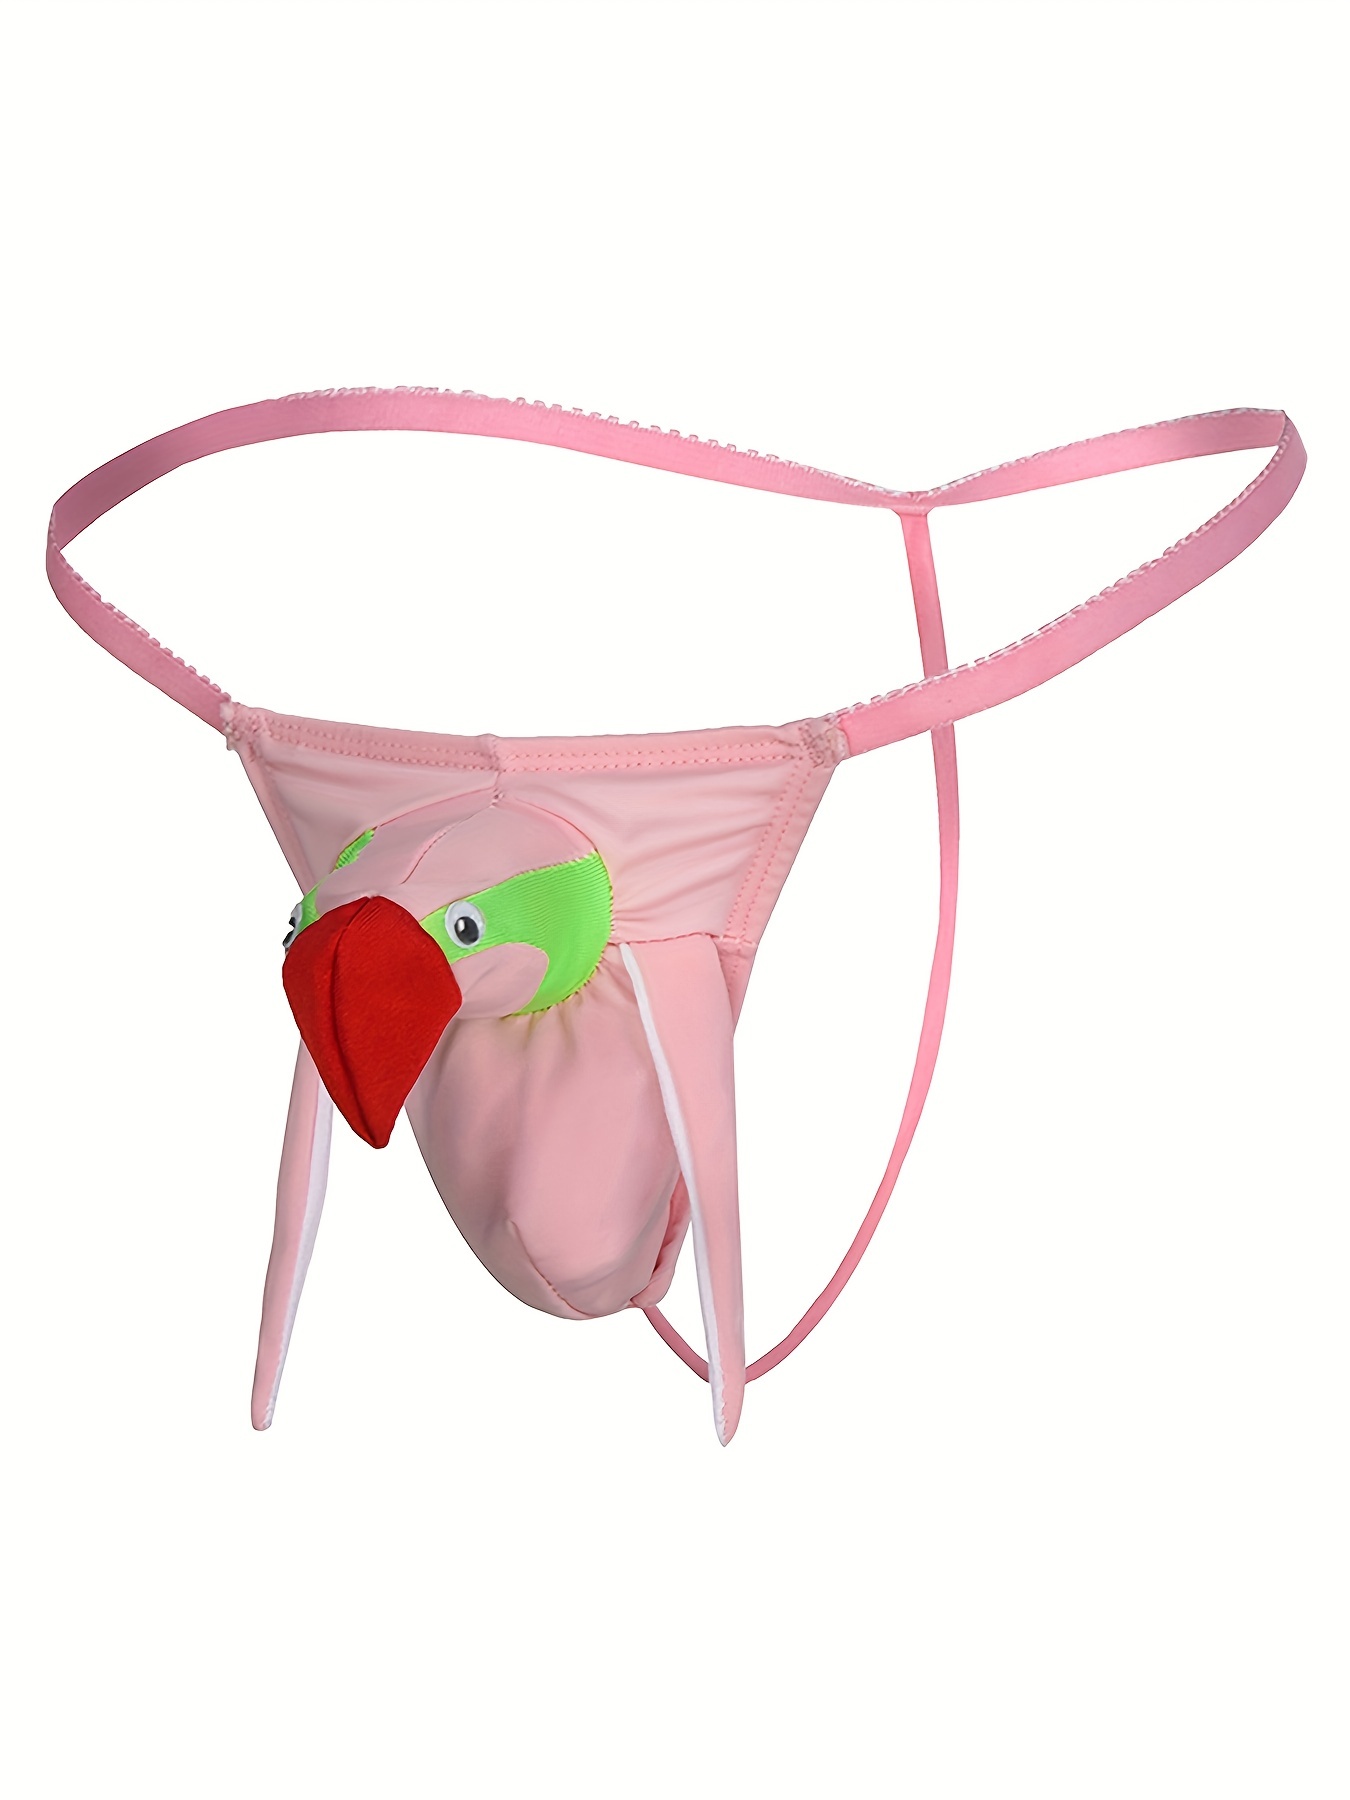 Pink Pig Nose Women's Underwear Thongs Sexy Breathable T-Back Panties 